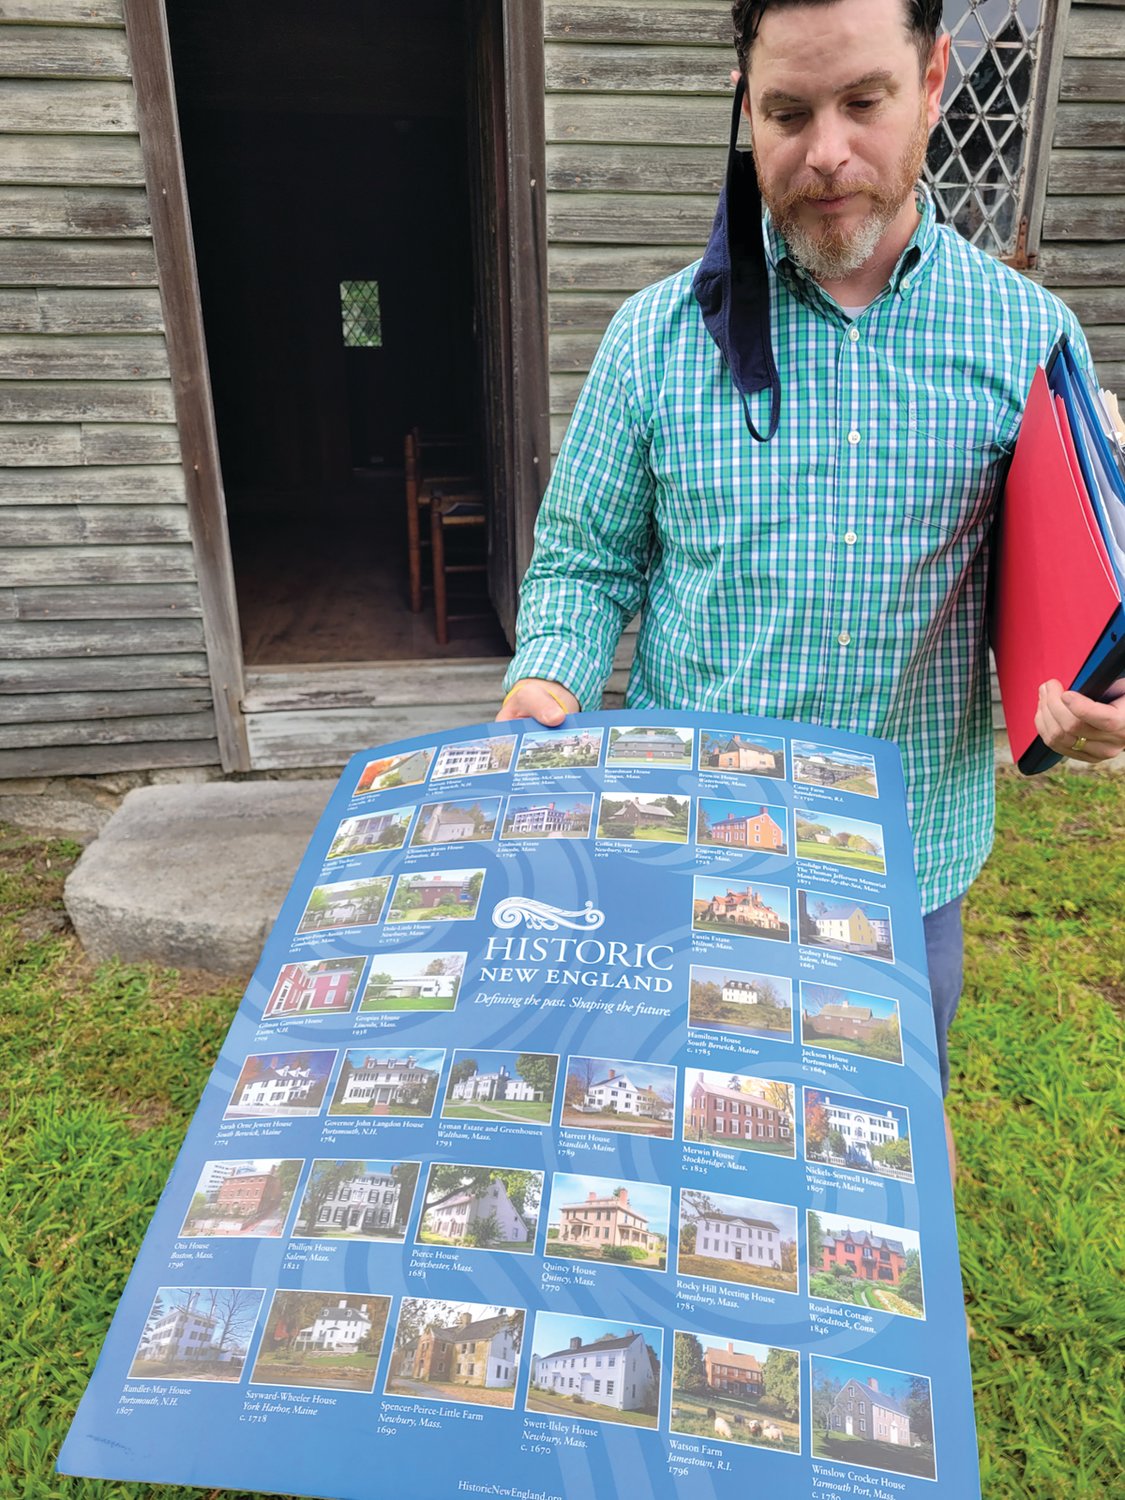 SPREADING IMPACT: Historic New England representative Dan Santos, regional site administrator for Southern New England, holds a poster showing all of the organizations house museums and preserved homesteads. Some of the locations are currently open for tours, but some are not, due to the COVID-19 pandemic.